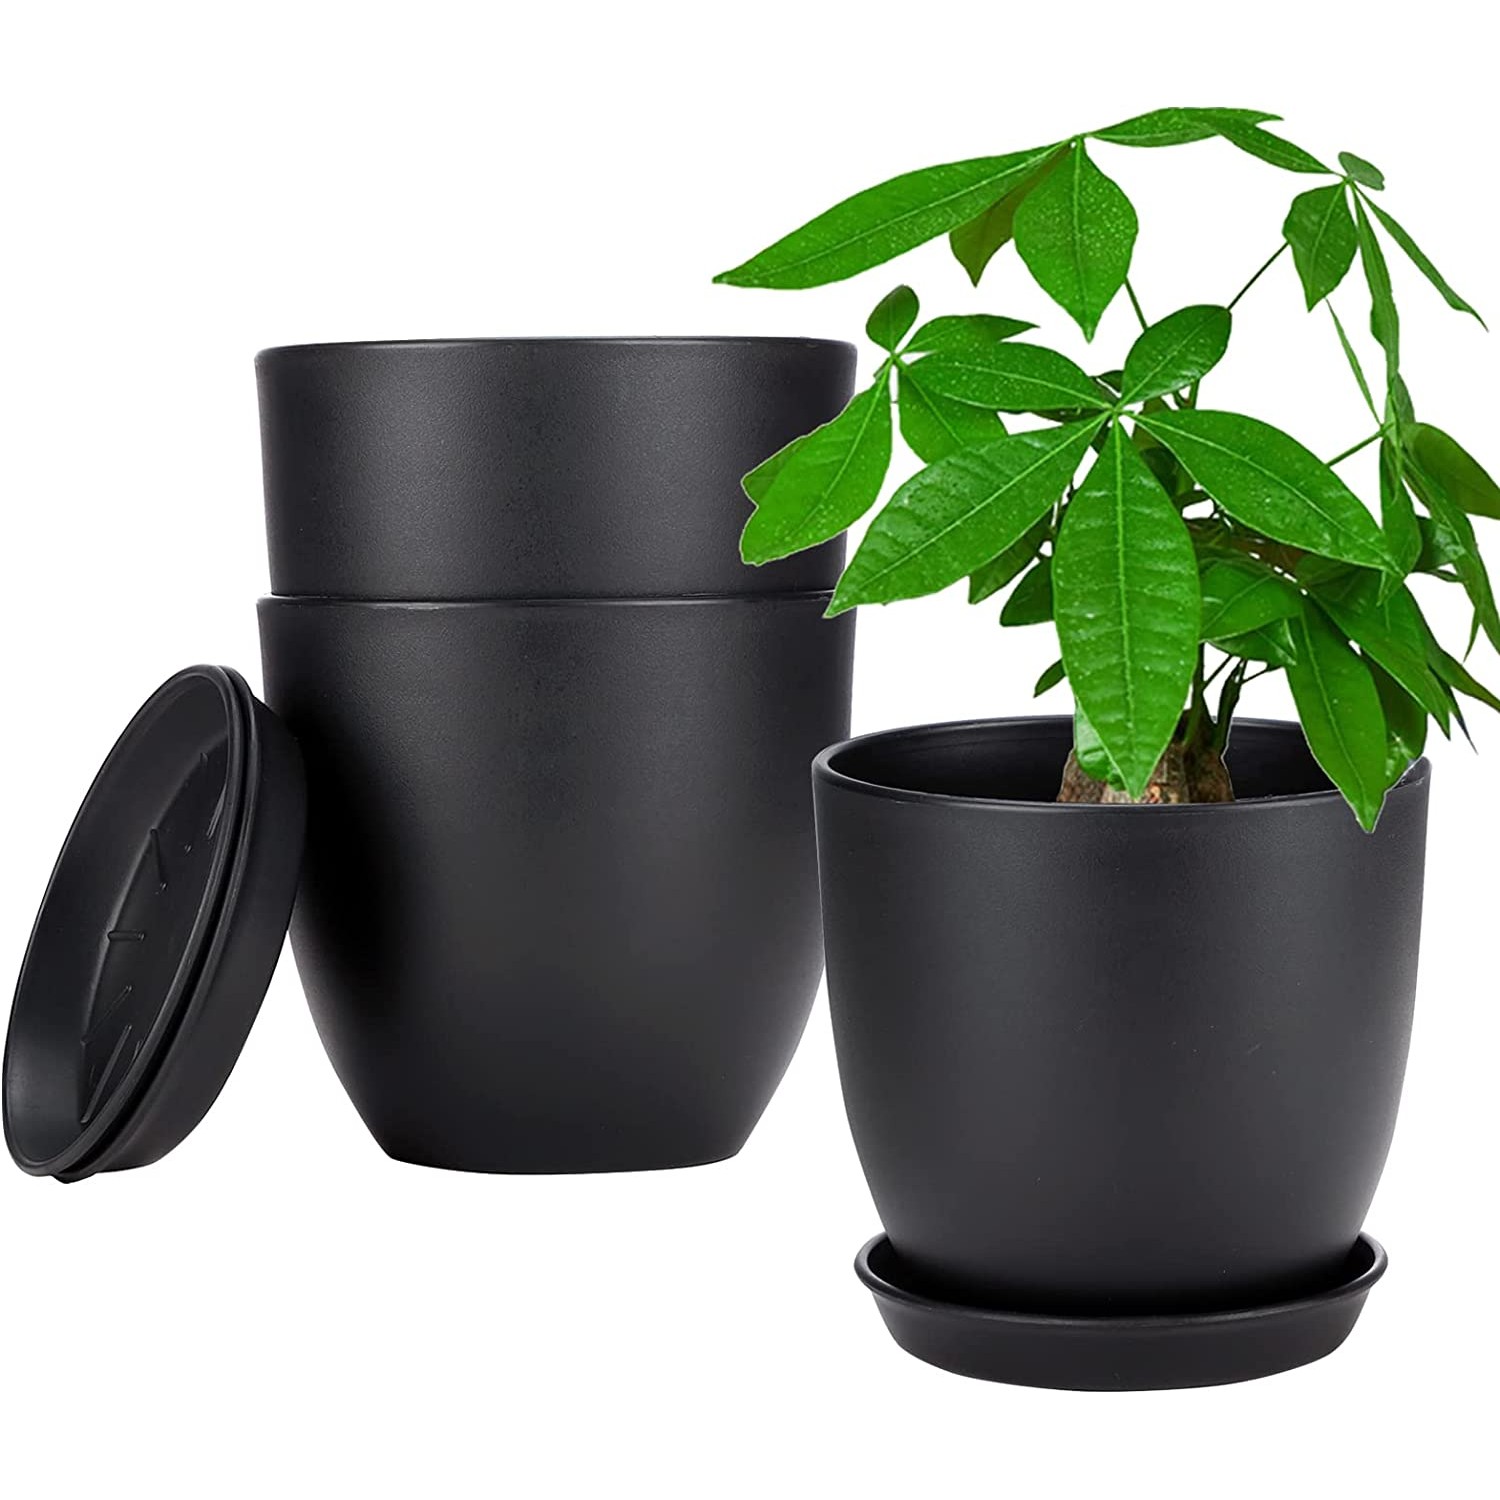 https://www.suream.life/image/cache/catalog/GREANER-Houseplant-Pots-and-Planters-63-Inch-Plant-Pots-with-Drainage-Ho/GREANER-Houseplant-Pots-and-Planters-63-Inch-Plant-Pots-with-Drainage-Holes-and--1500x1500.jpg